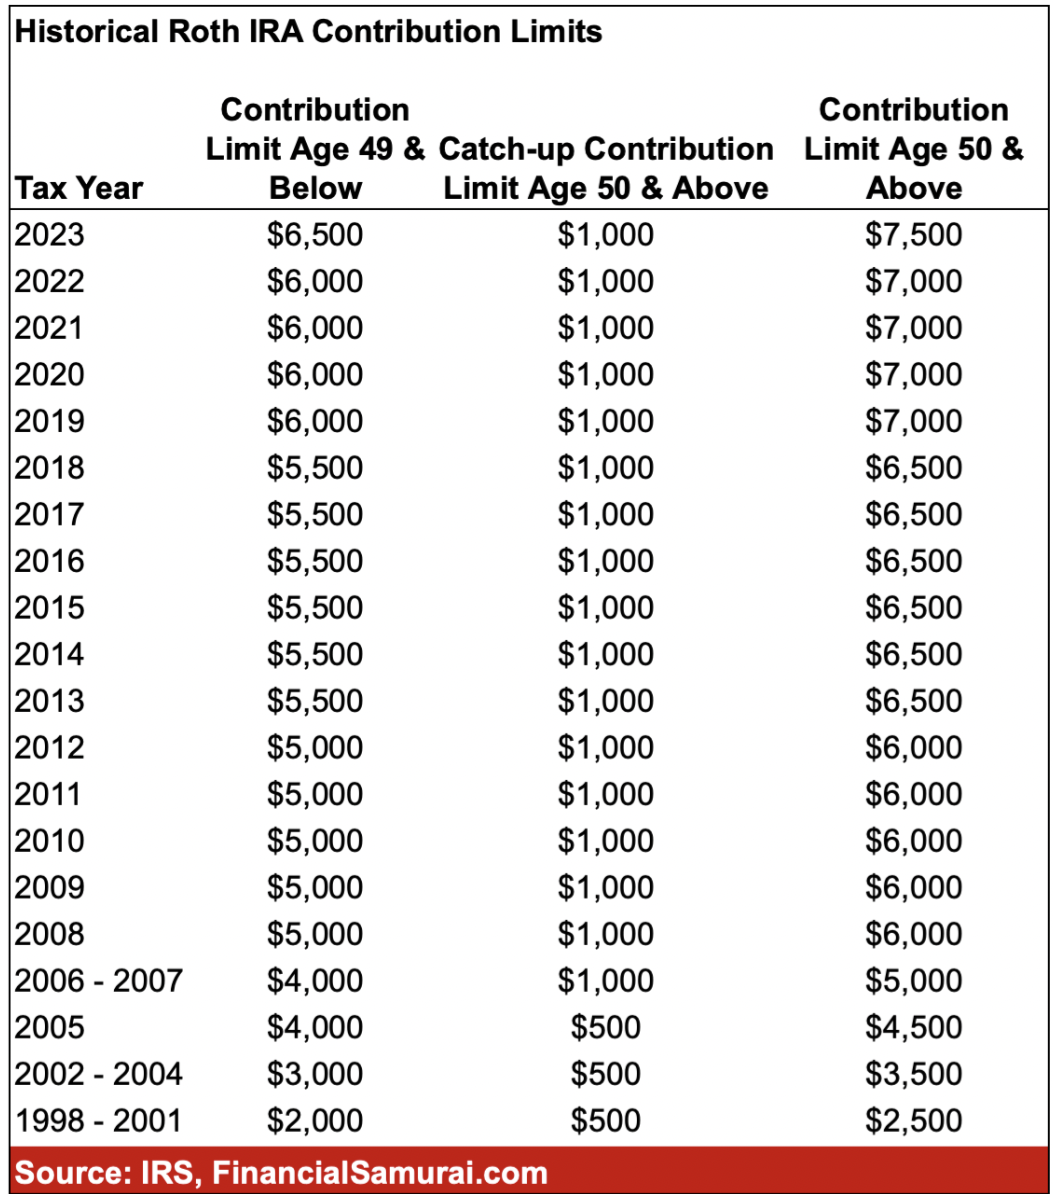 Historical Roth IRA contribution limits and catchup contribution limits above age 50 through 2023